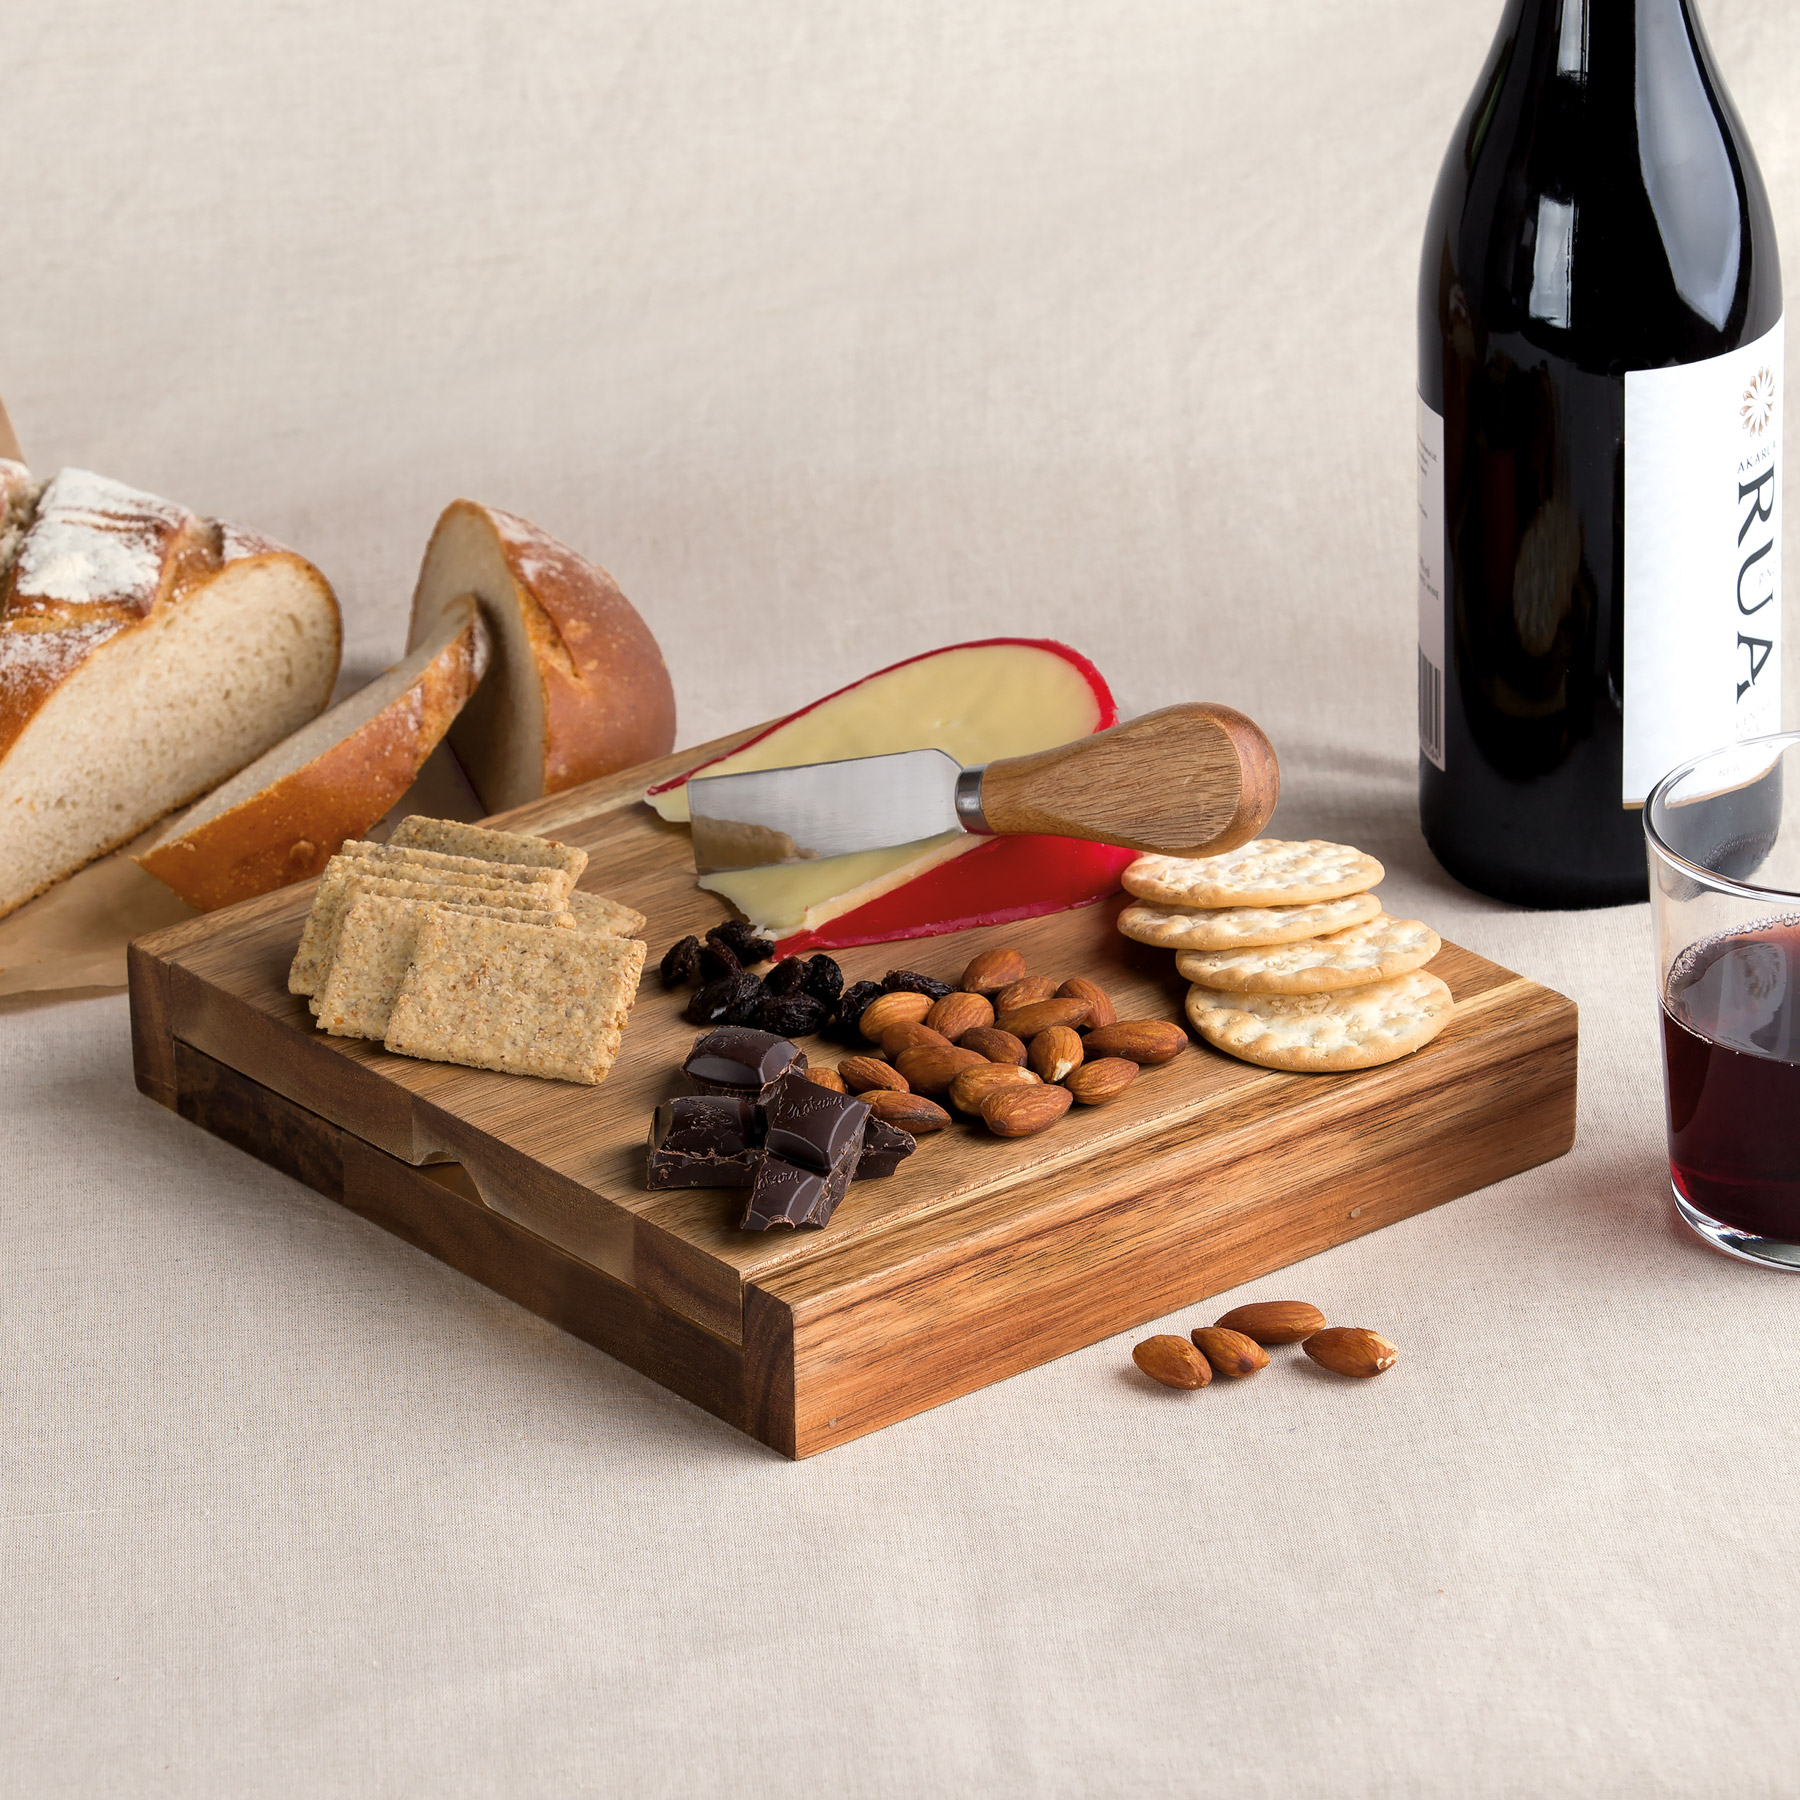 Clamshell Cheese Board Features